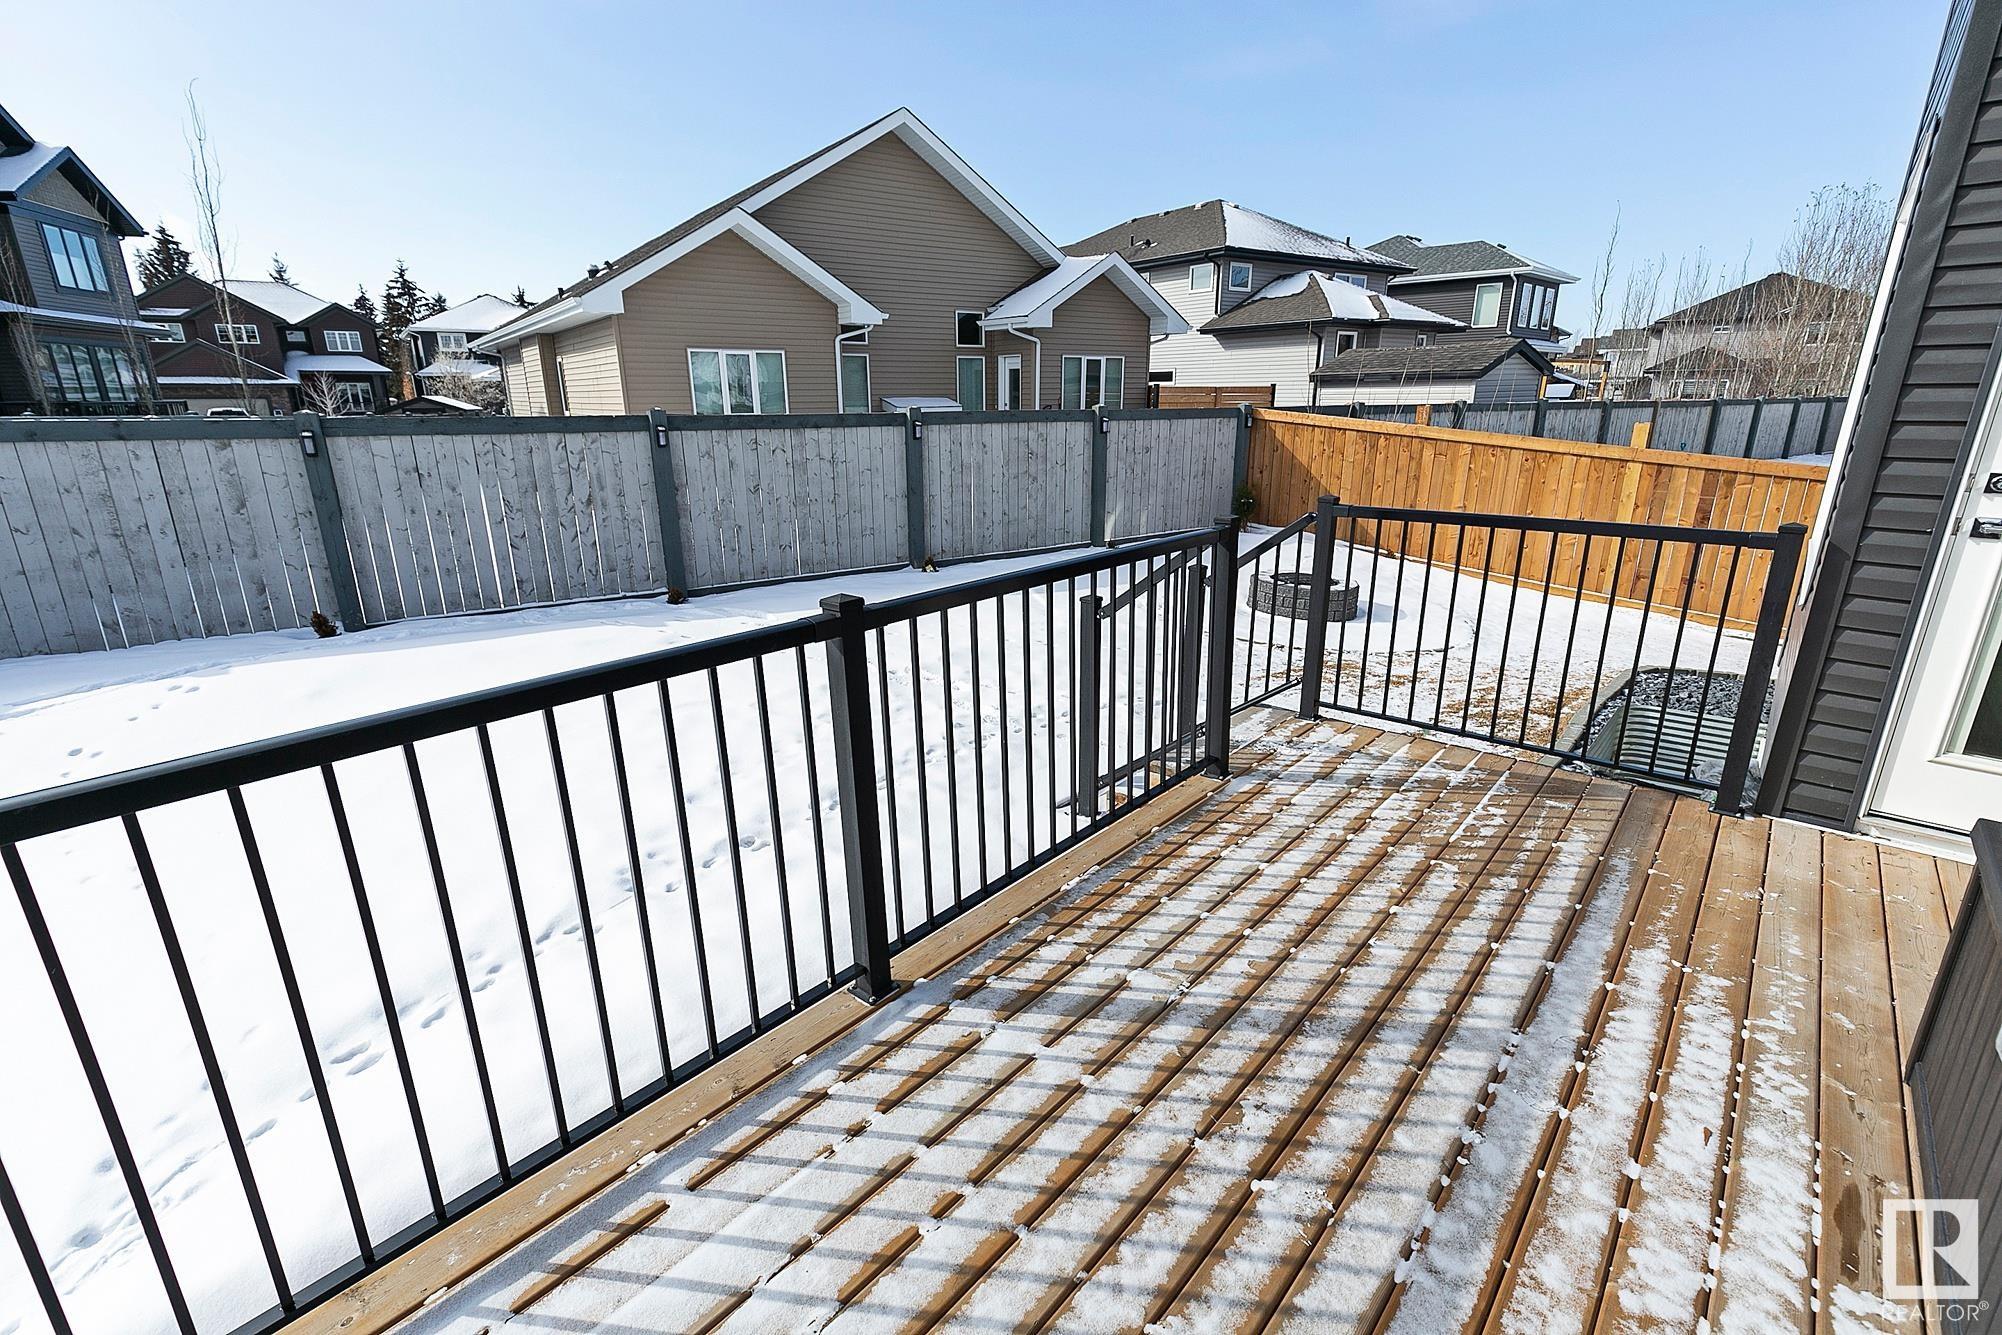      11 LINCOLN CO , Spruce Grove,  ,T7X 0N5 ;  Listing Number: MLS E4331406